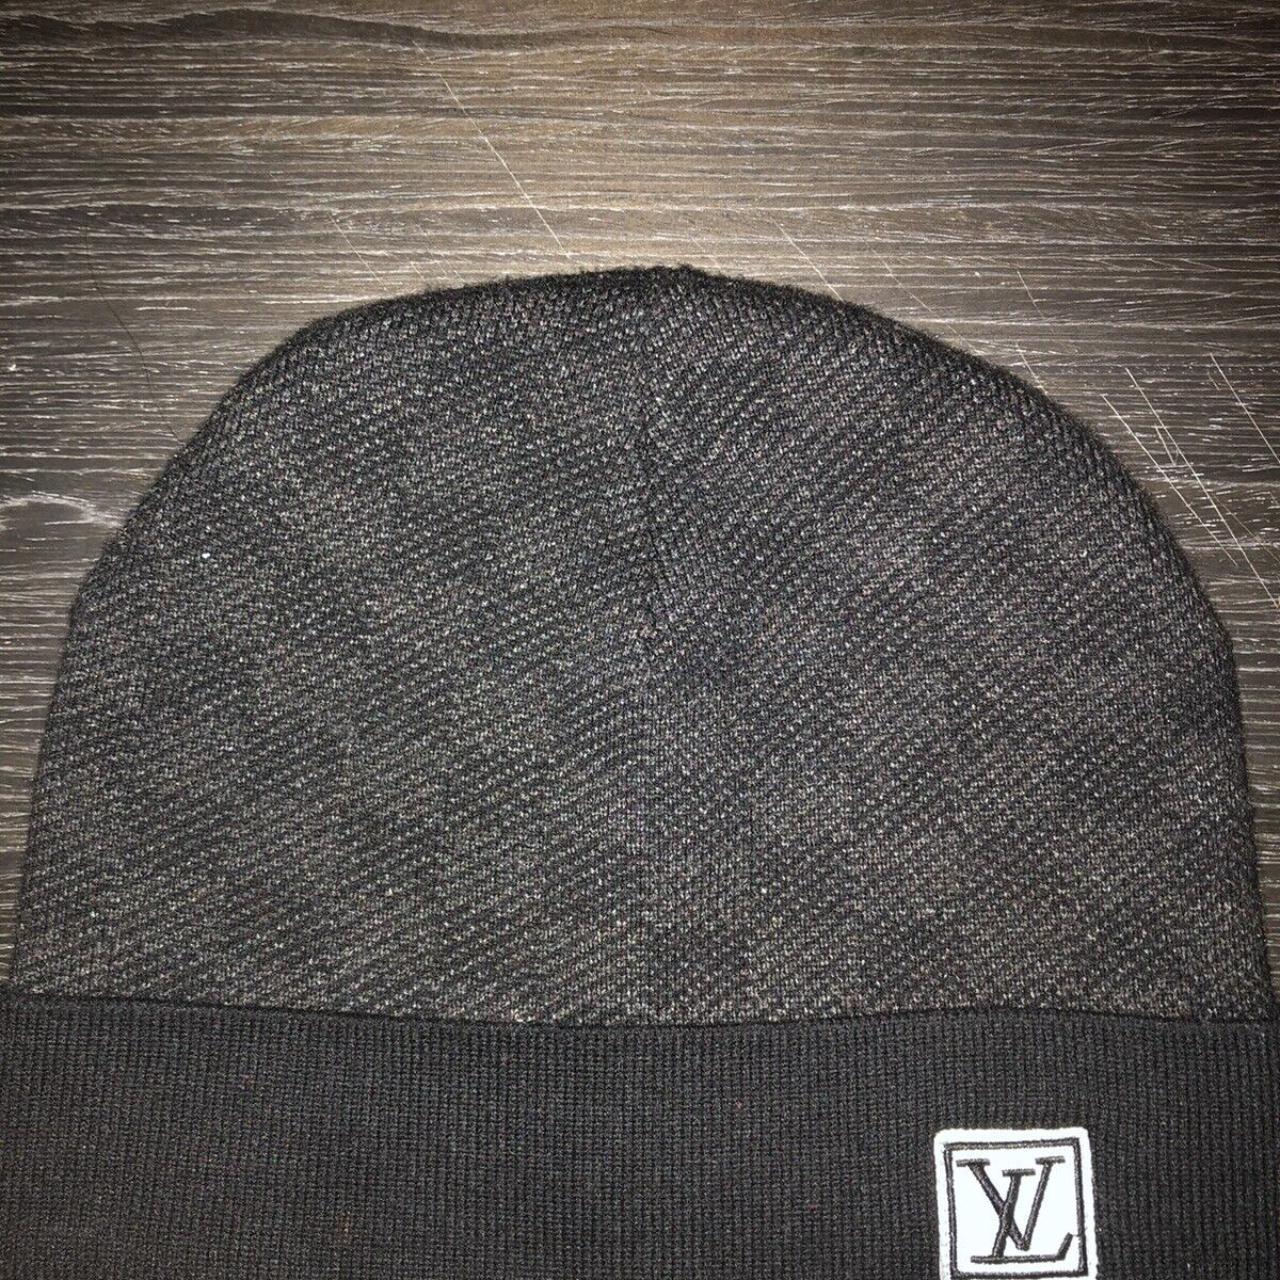 Upcycled Louis Vuitton classic white baseball hat. - Depop